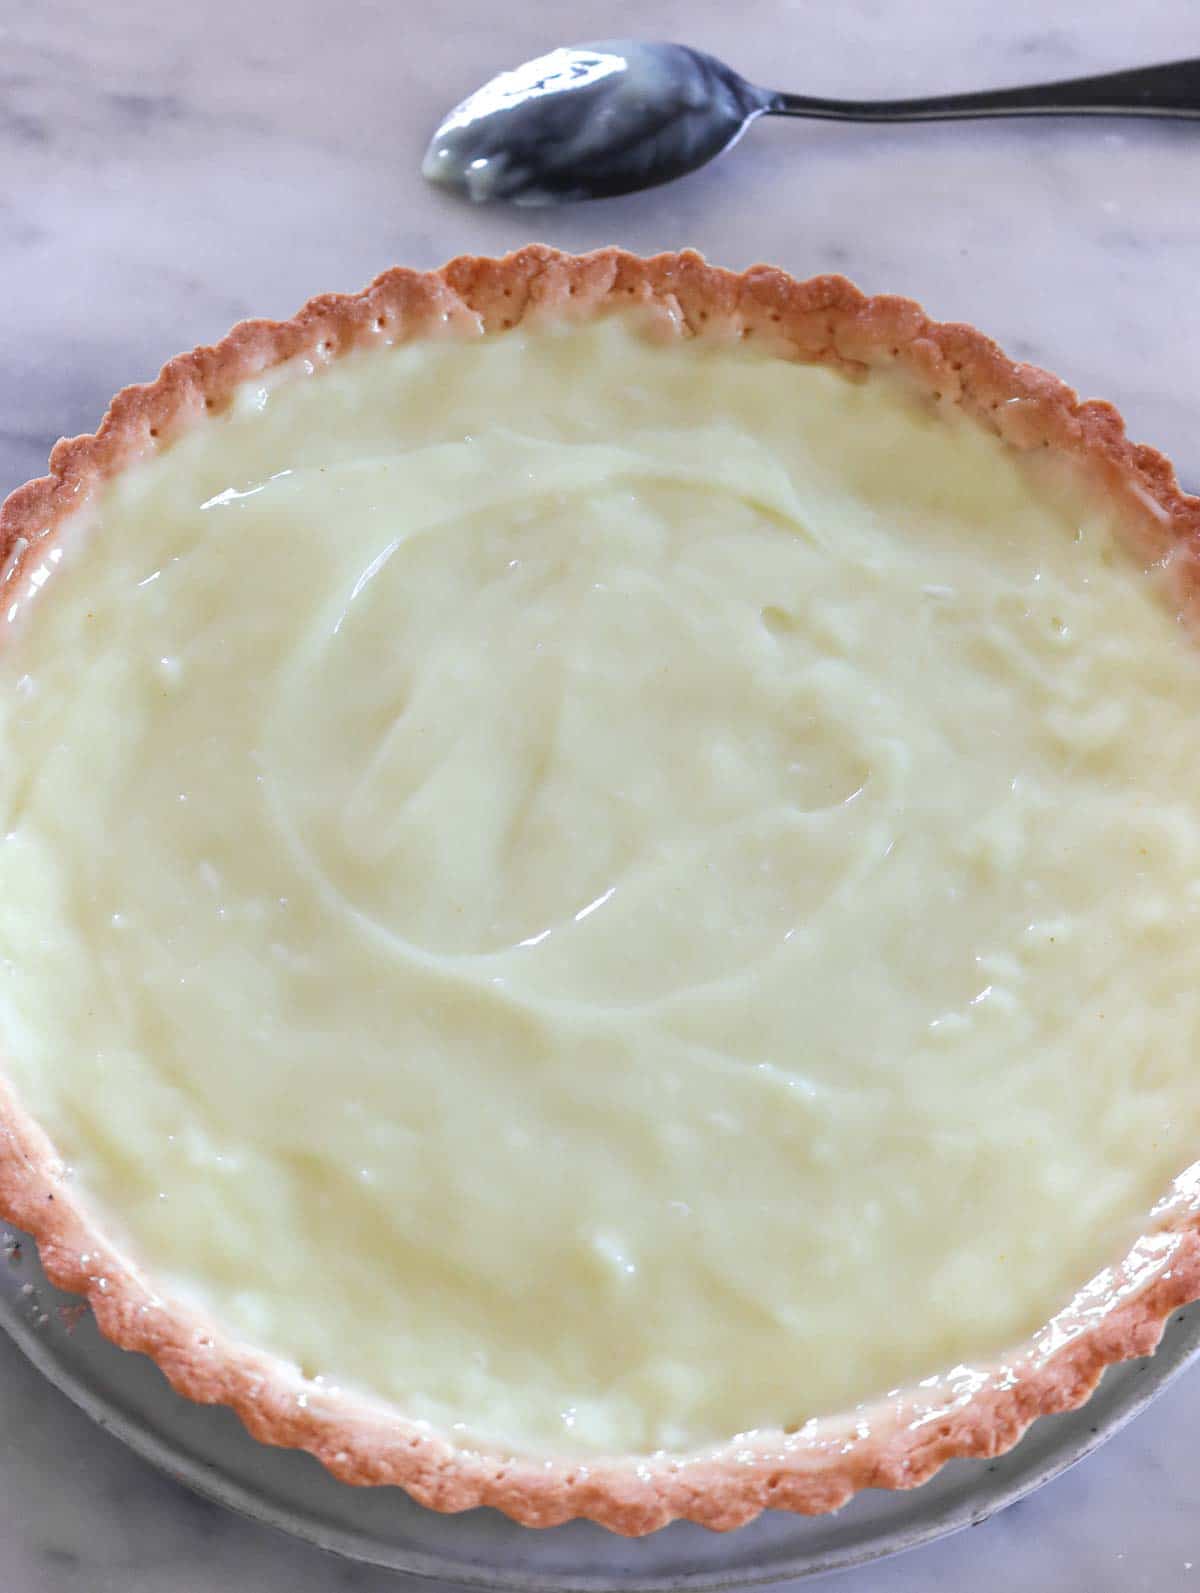 filling the pie crust with the custard